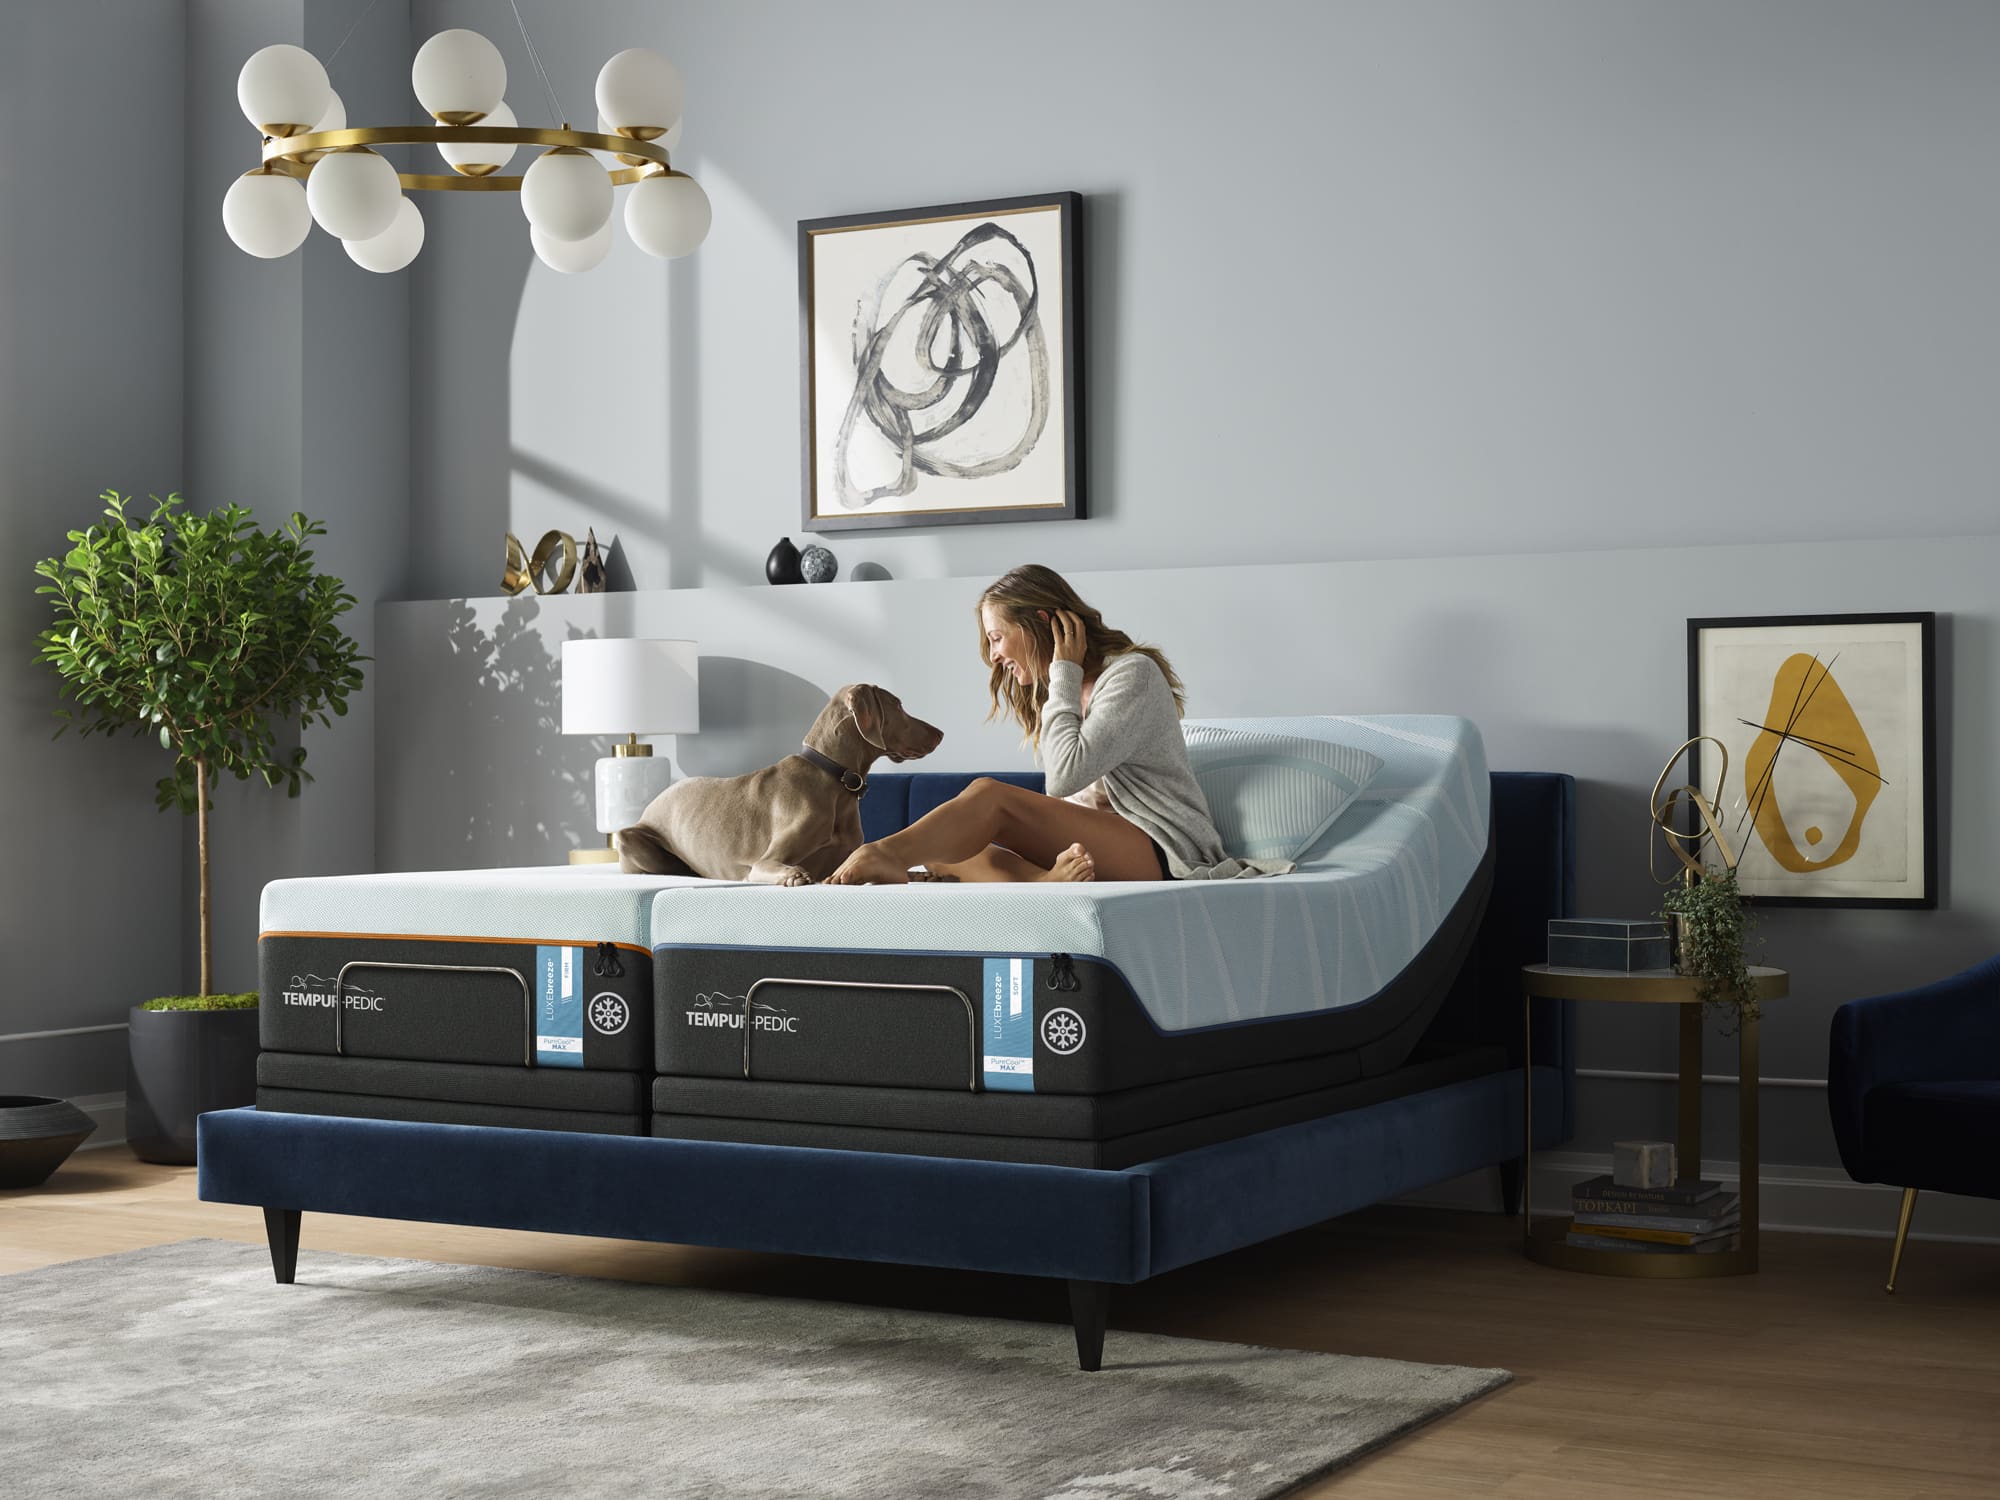 Woman on Tempur-Pedic mattress with dog in bedroom